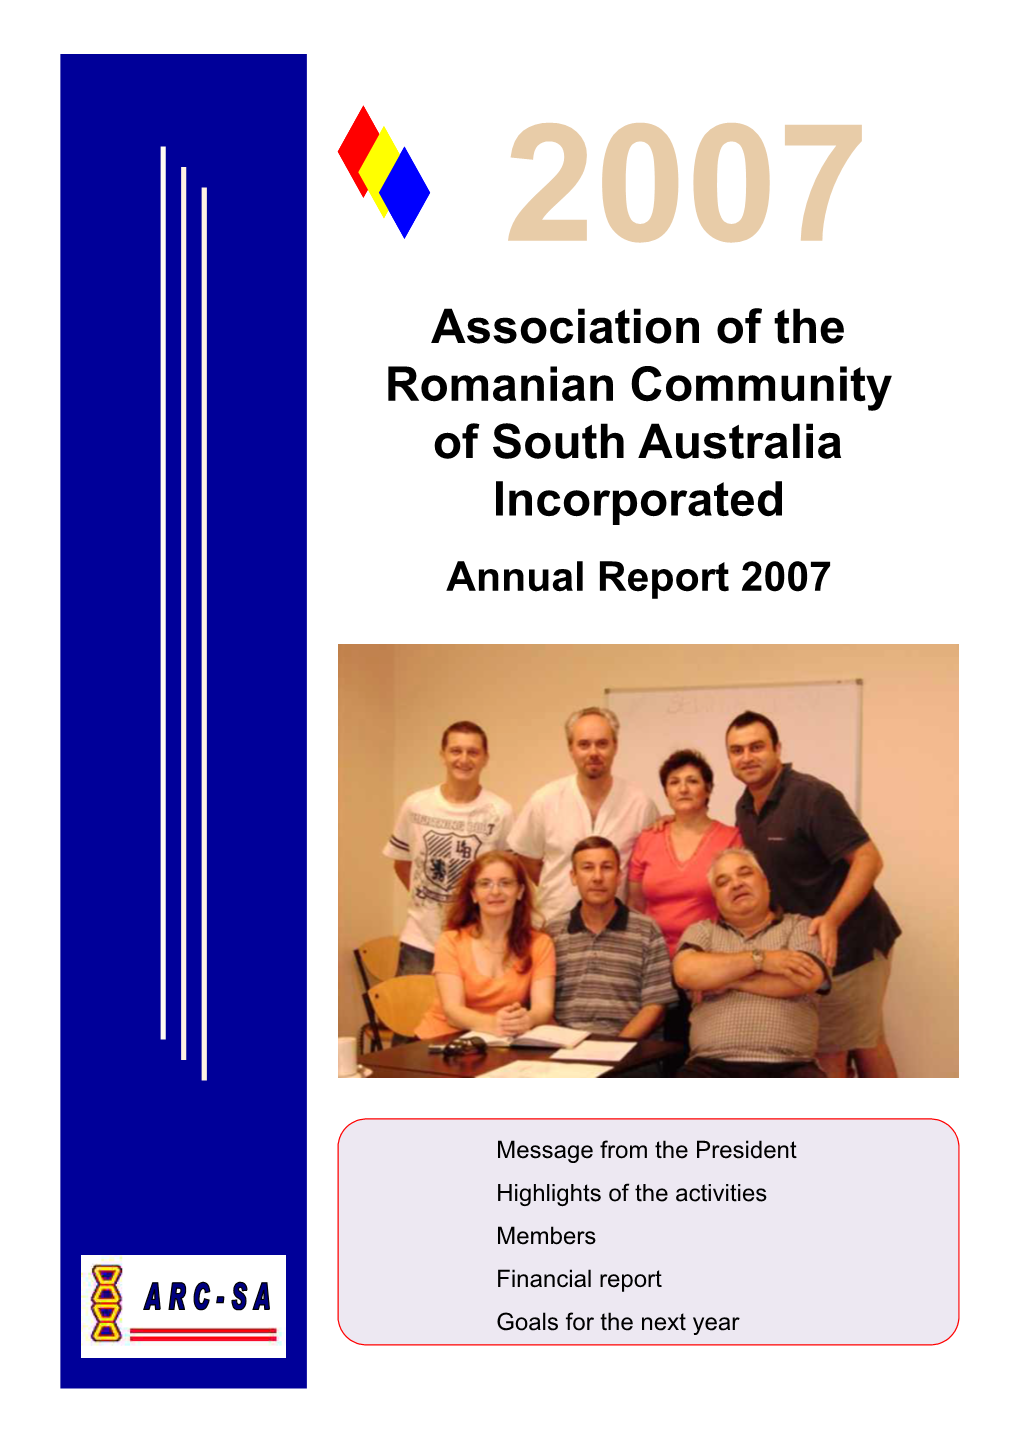 Association of the Romanian Community of South Australia Incorporated Annual Report 2007